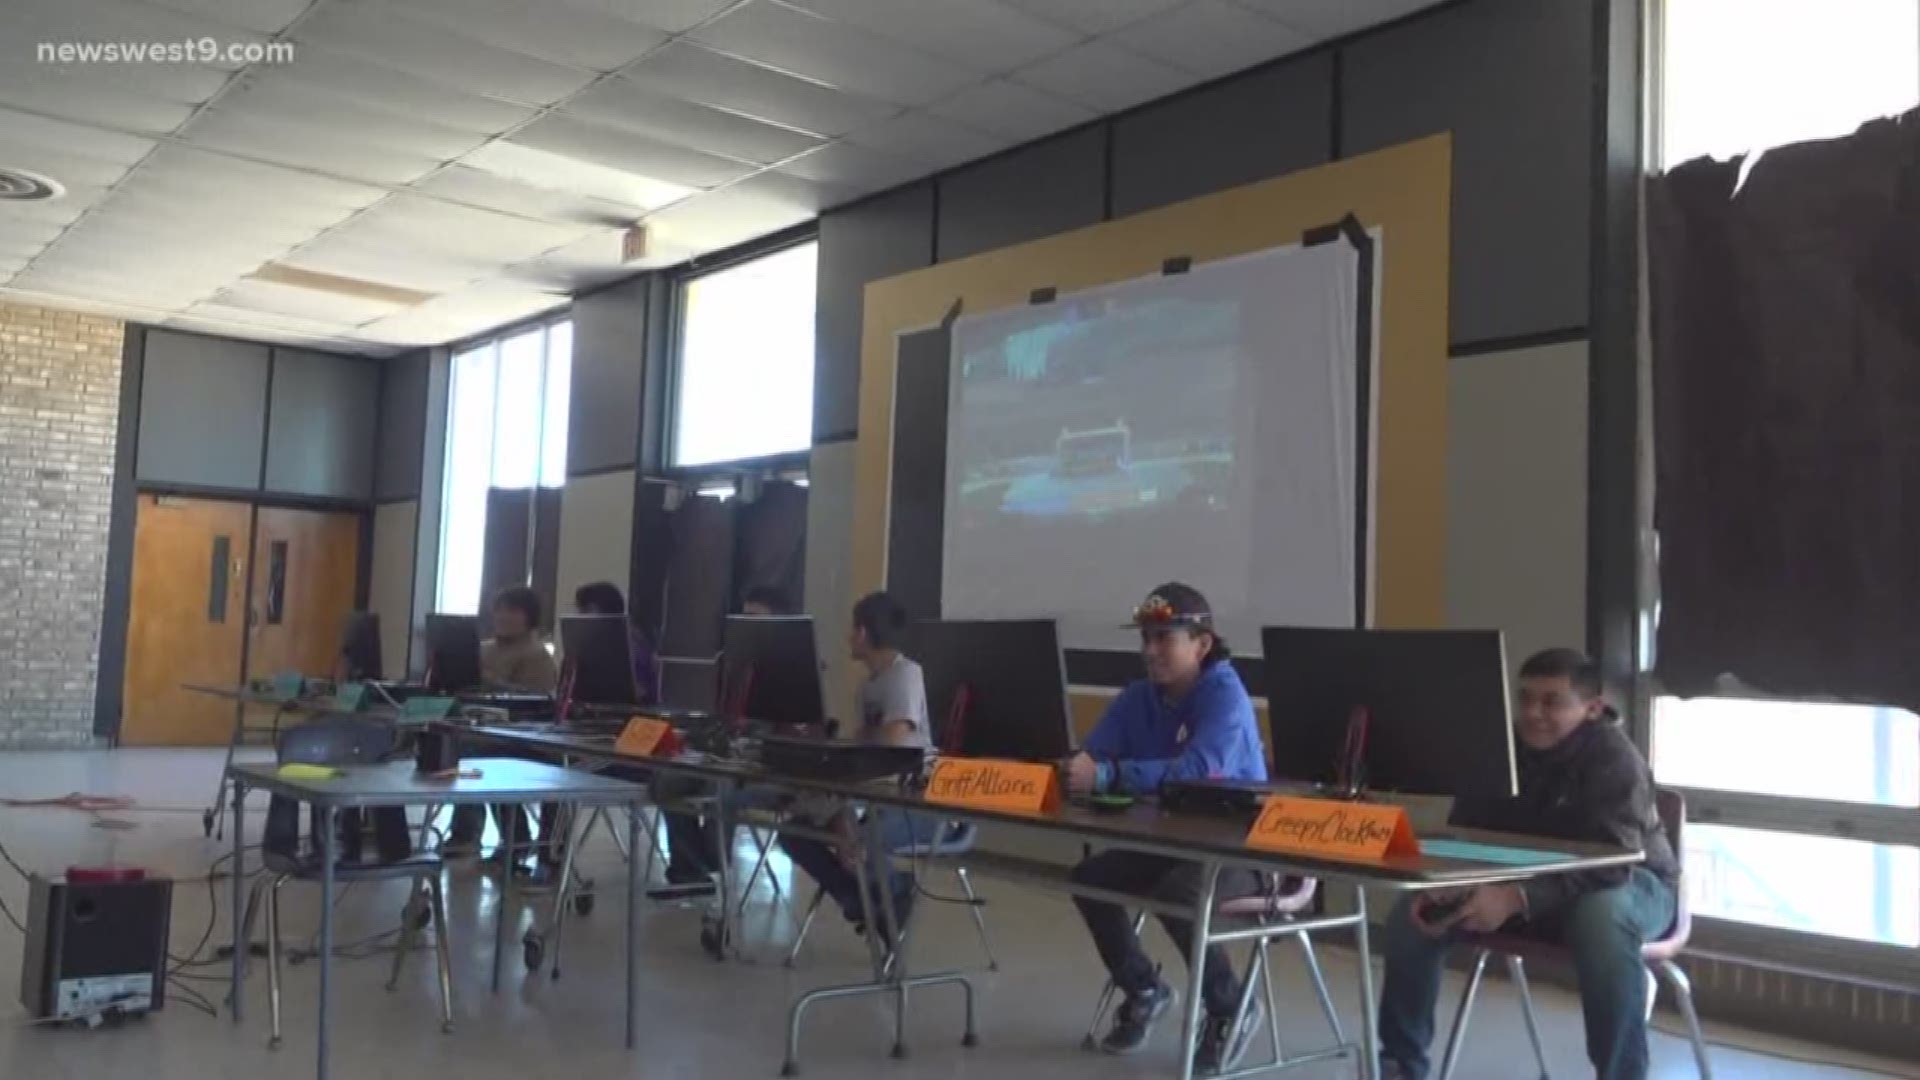 Big Spring ISD hosted the Basin's inaugural eSports tournament.